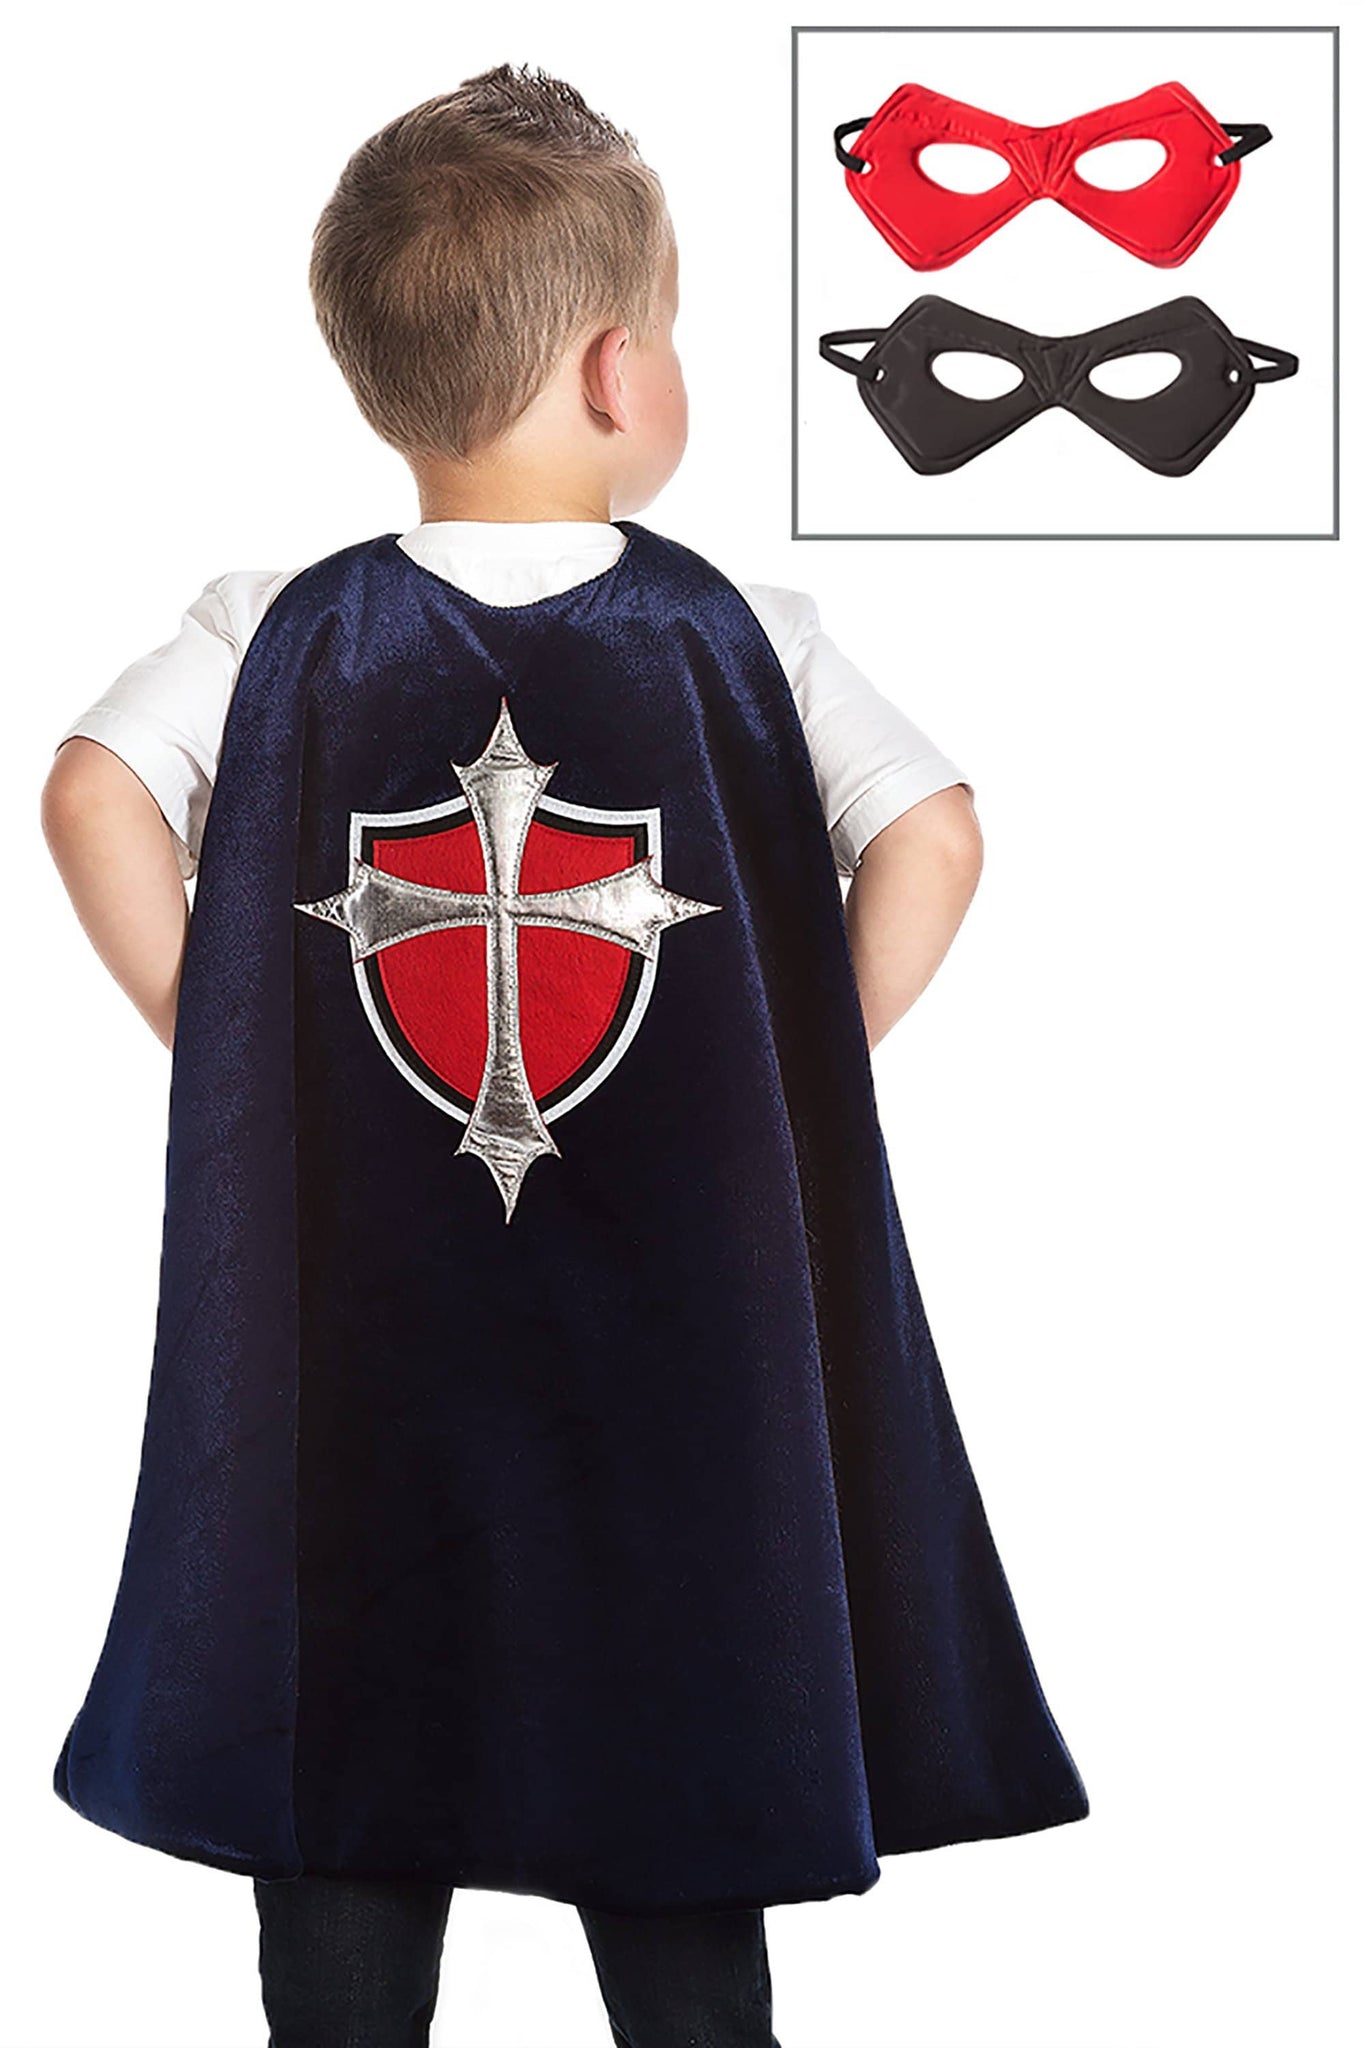 Prince Cape And Mask Set Ages 3-8-Kidding Around NYC